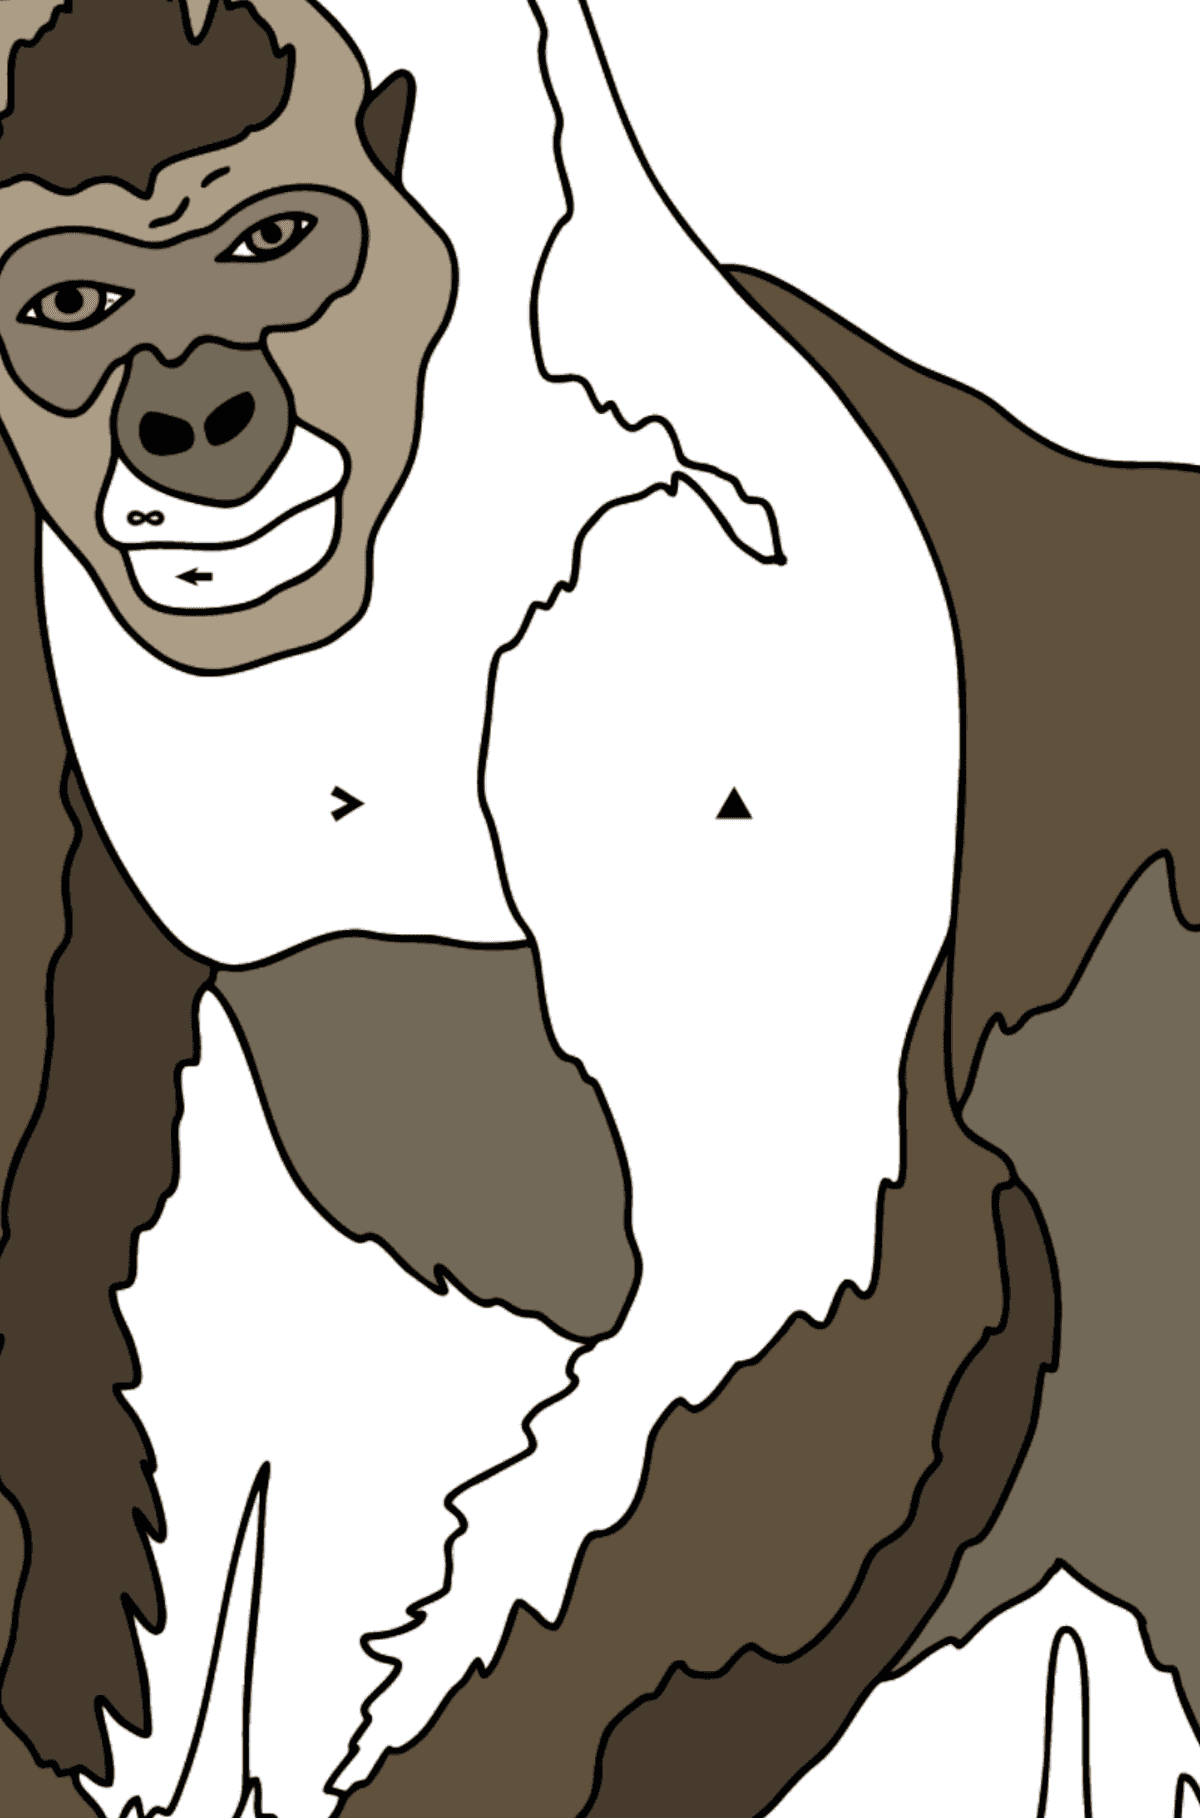 Coloring Page - A Hairy Gorilla - Coloring by Symbols for Kids